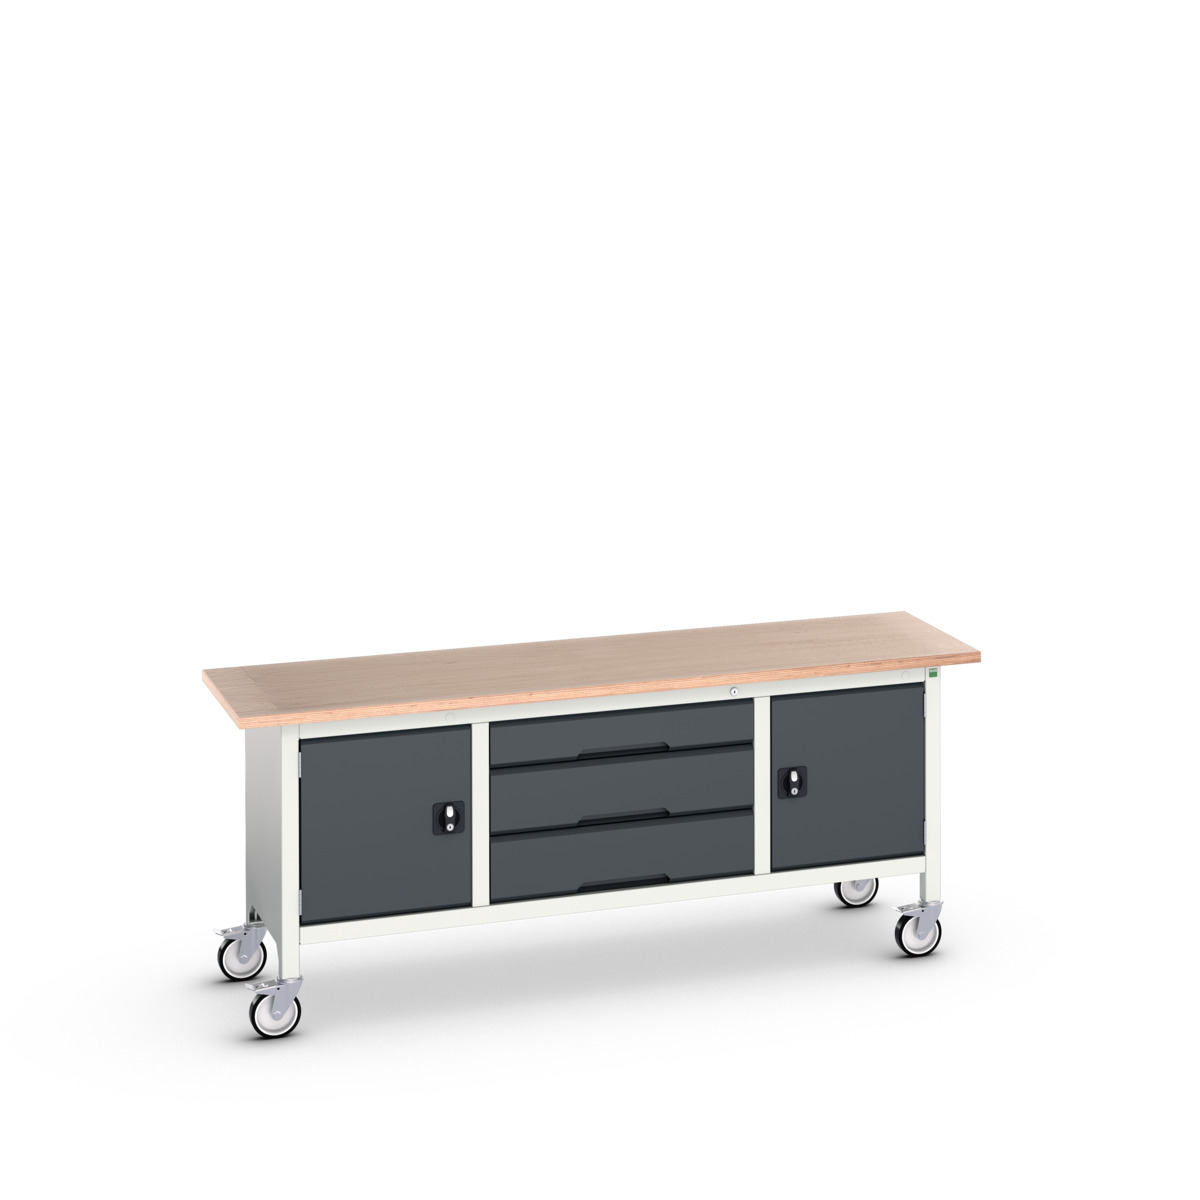 16923232. - verso mobile storage bench (mpx)